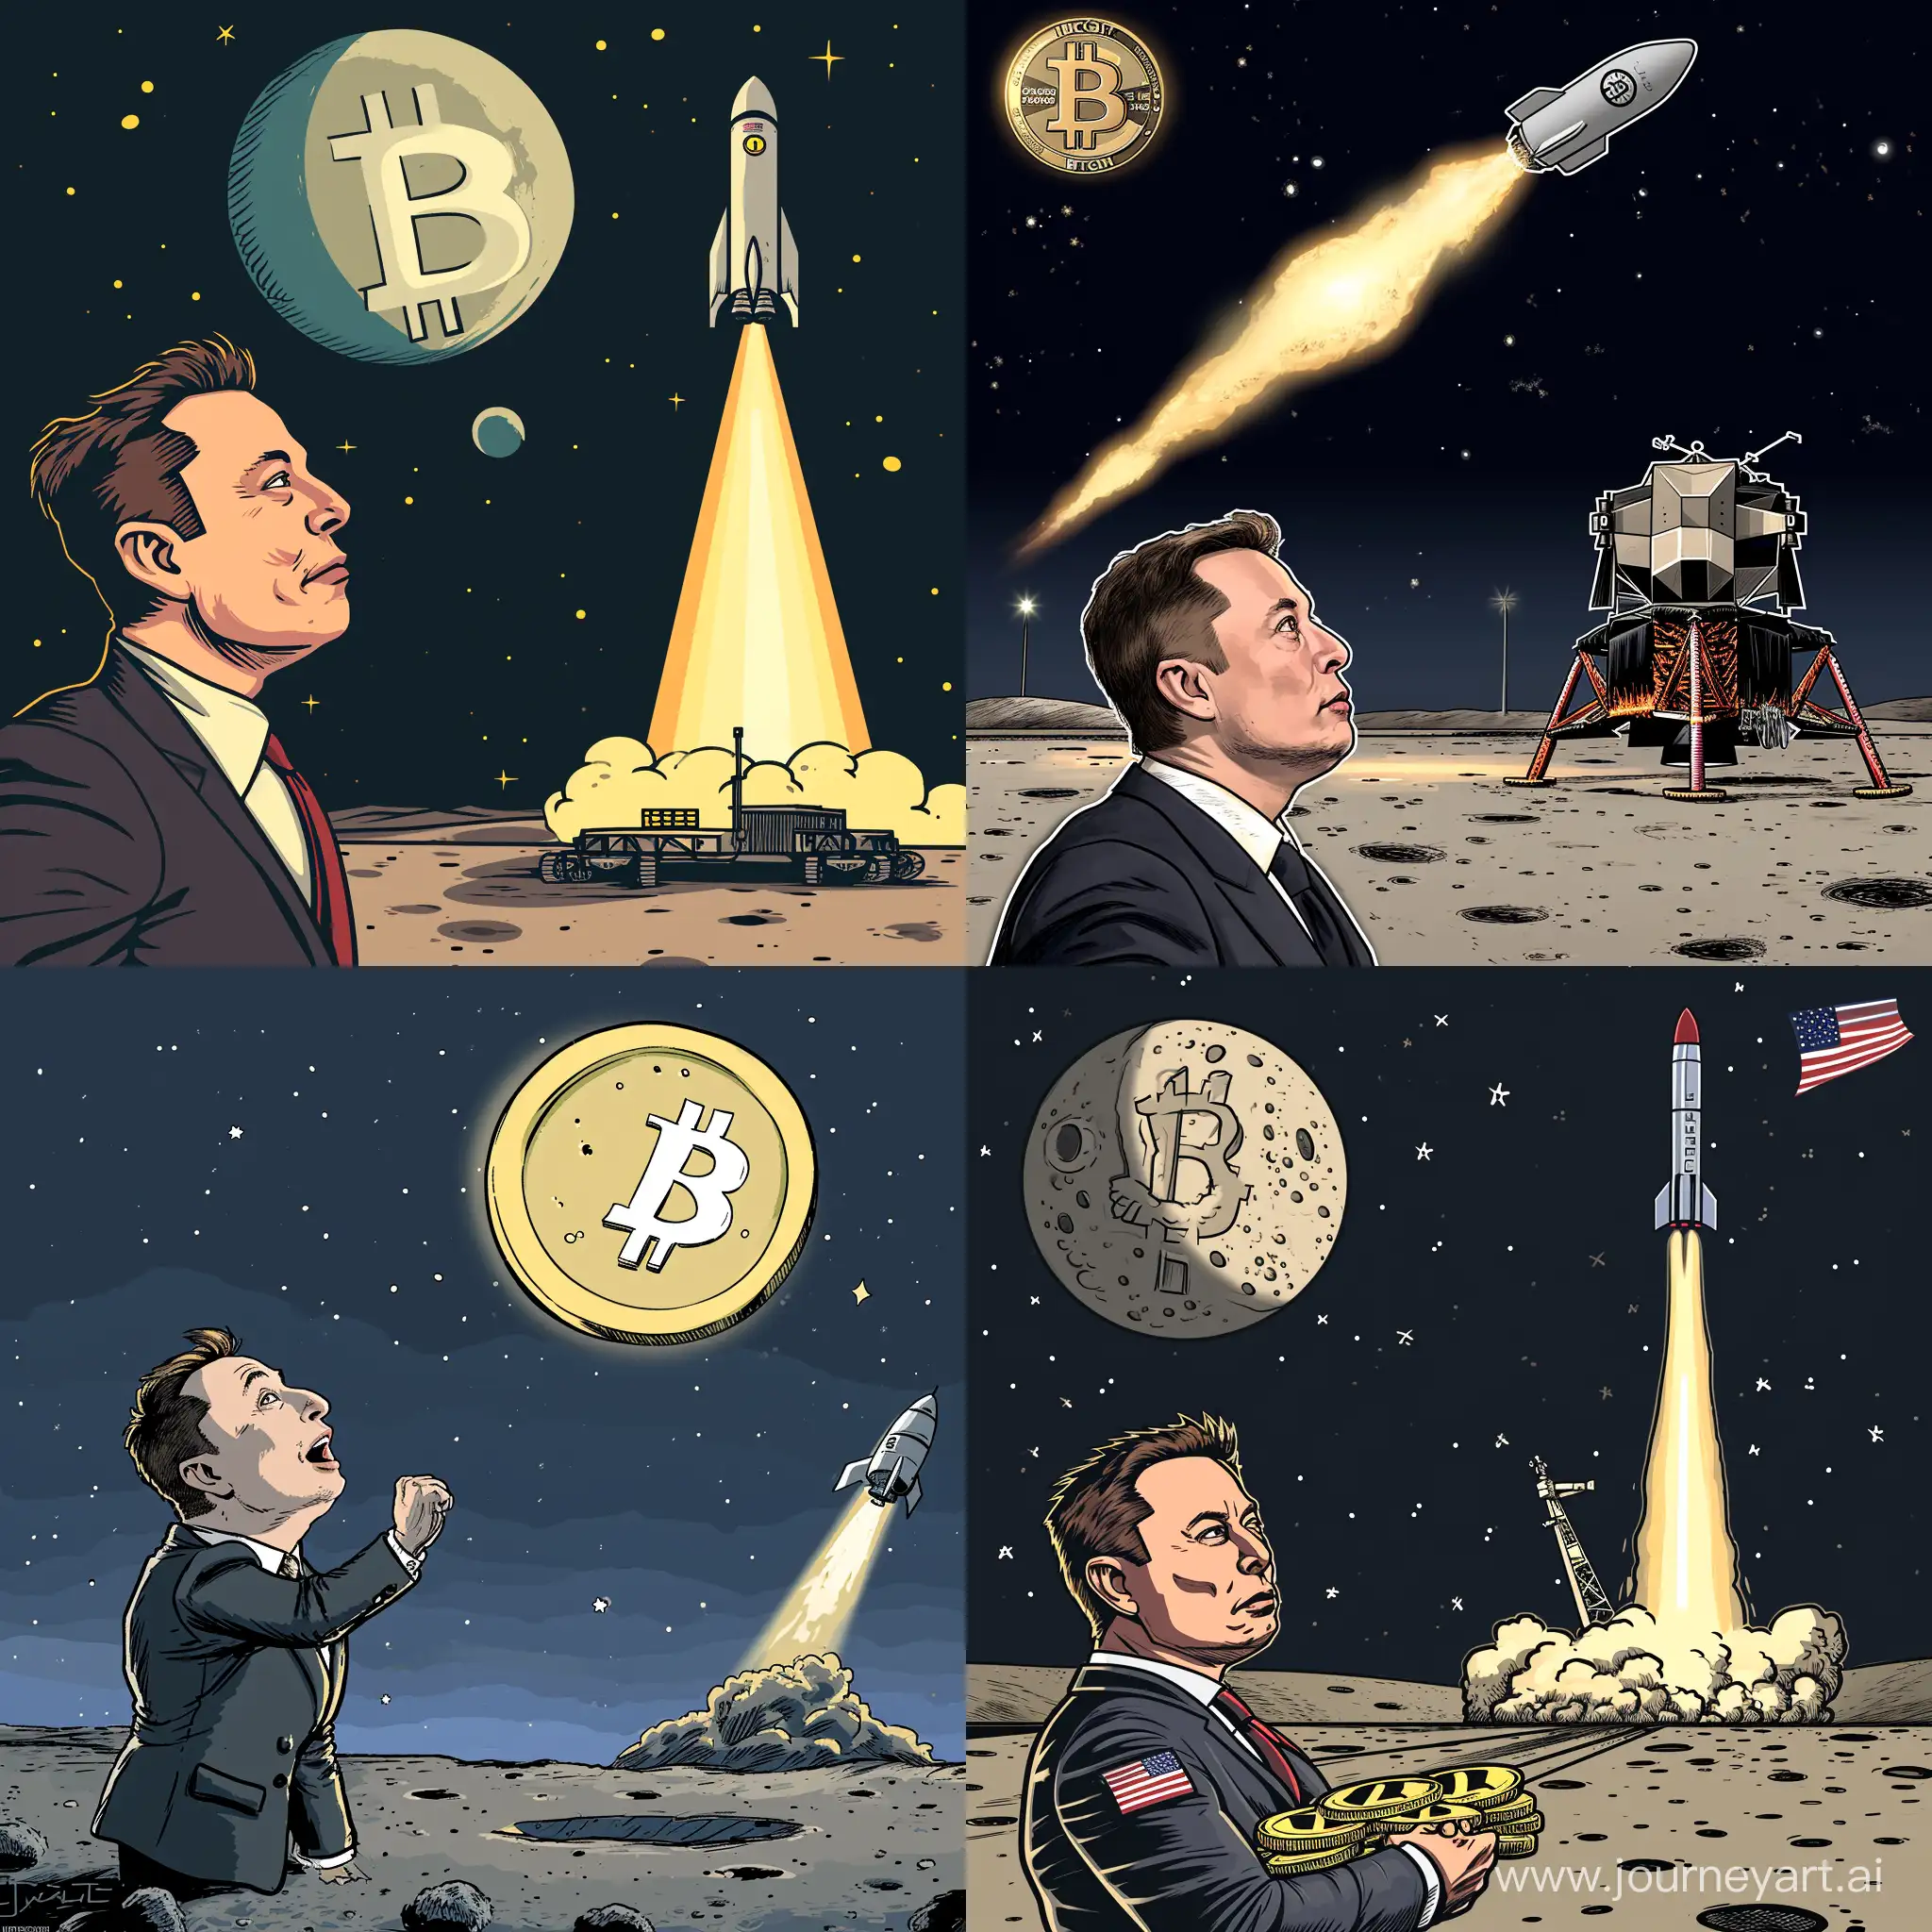 Elon-Musk-Launches-Bitcoin-to-the-Moon-in-Cartoon-Style